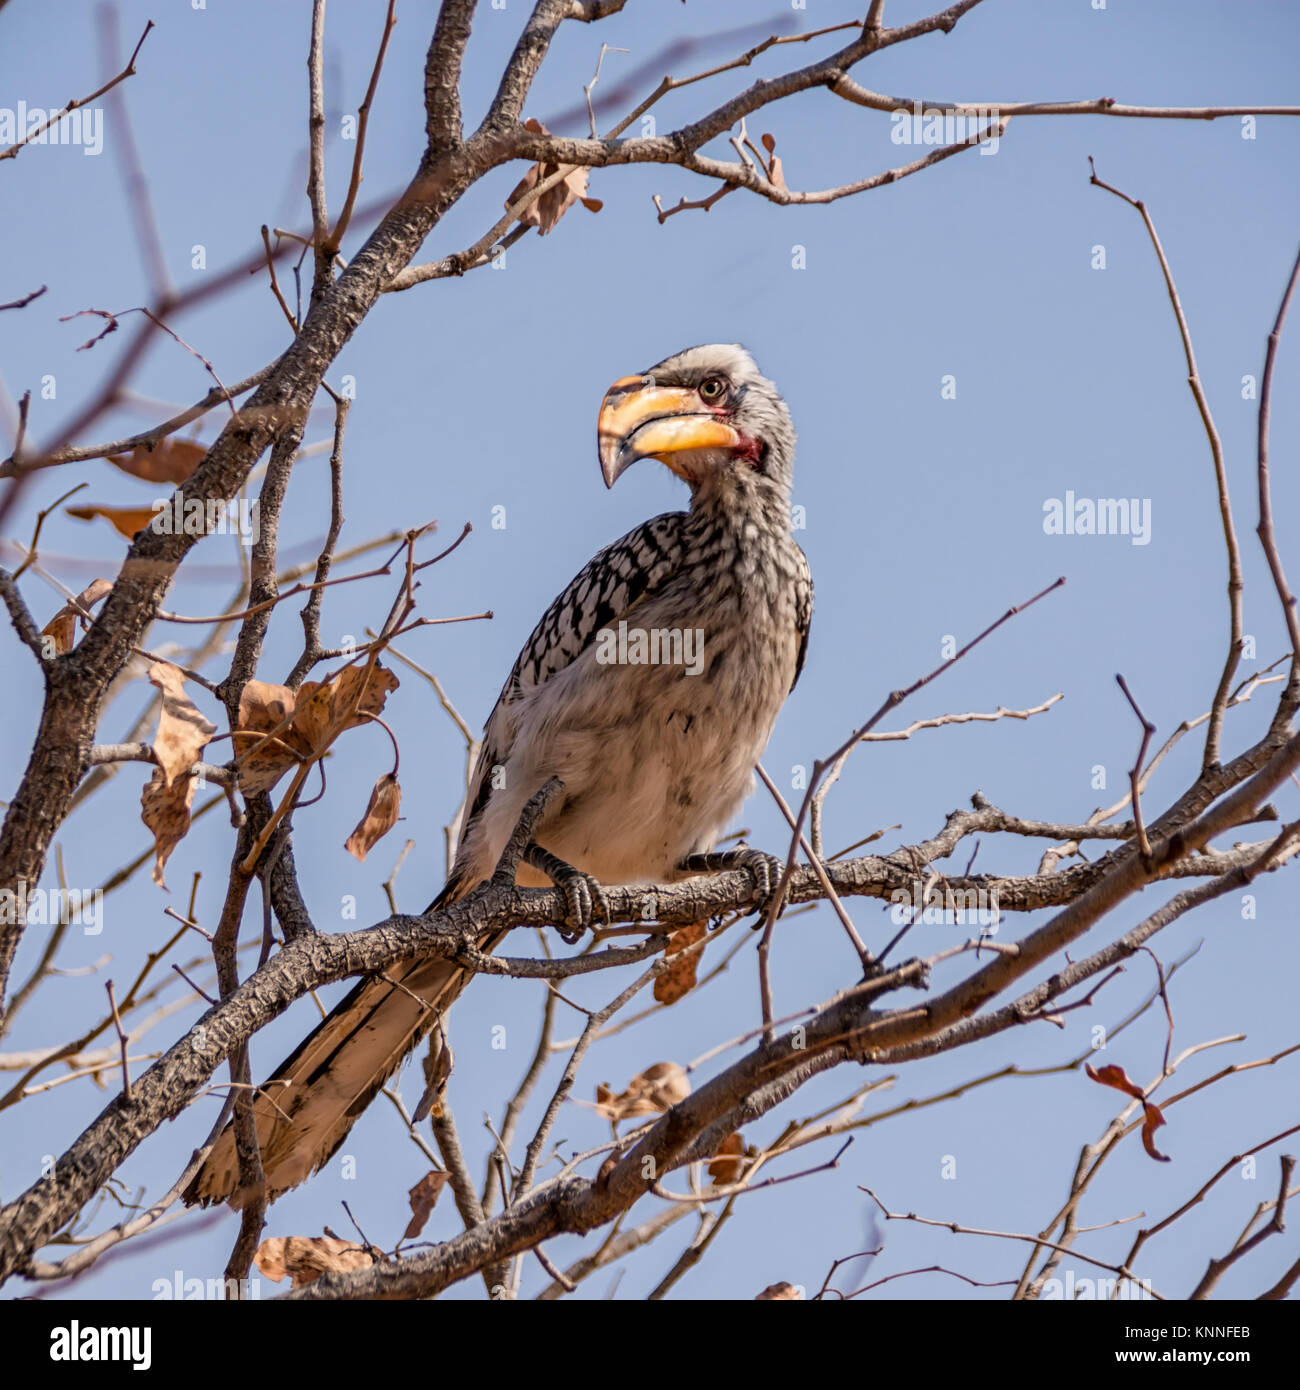 A Yellow-billed Hornbill perched in a tree in Namibian savanna Stock Photo